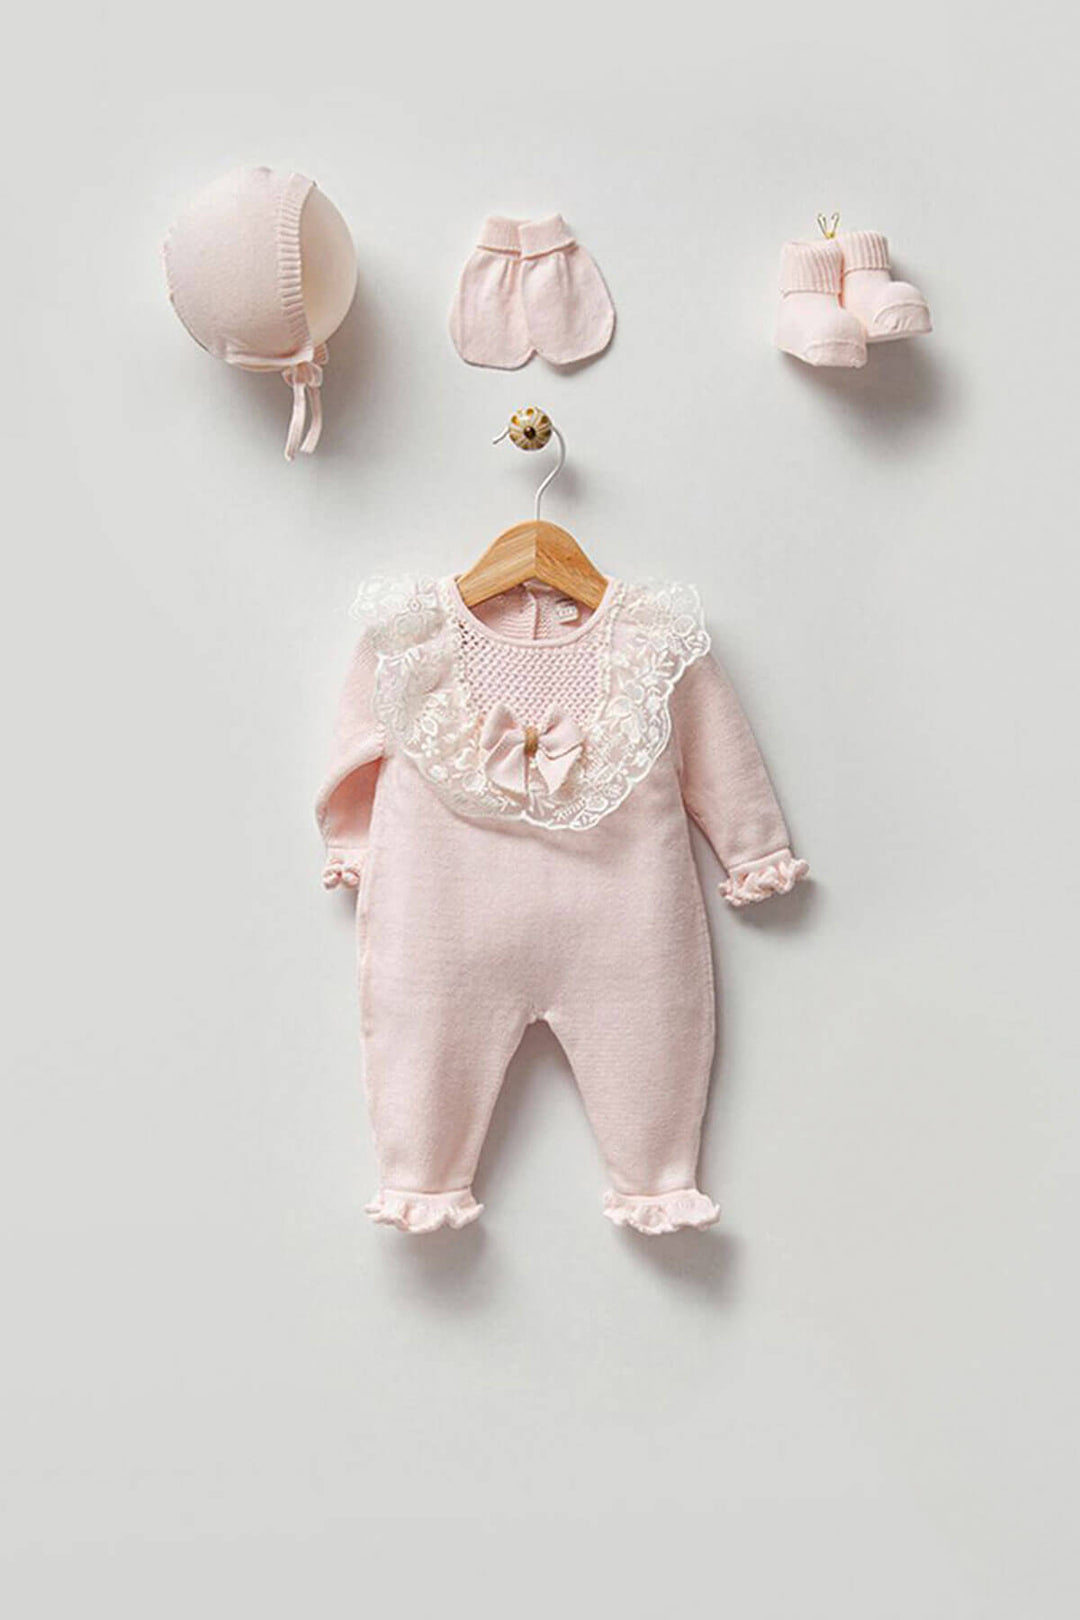 newborn knitwear hospital exit outfit for baby girl